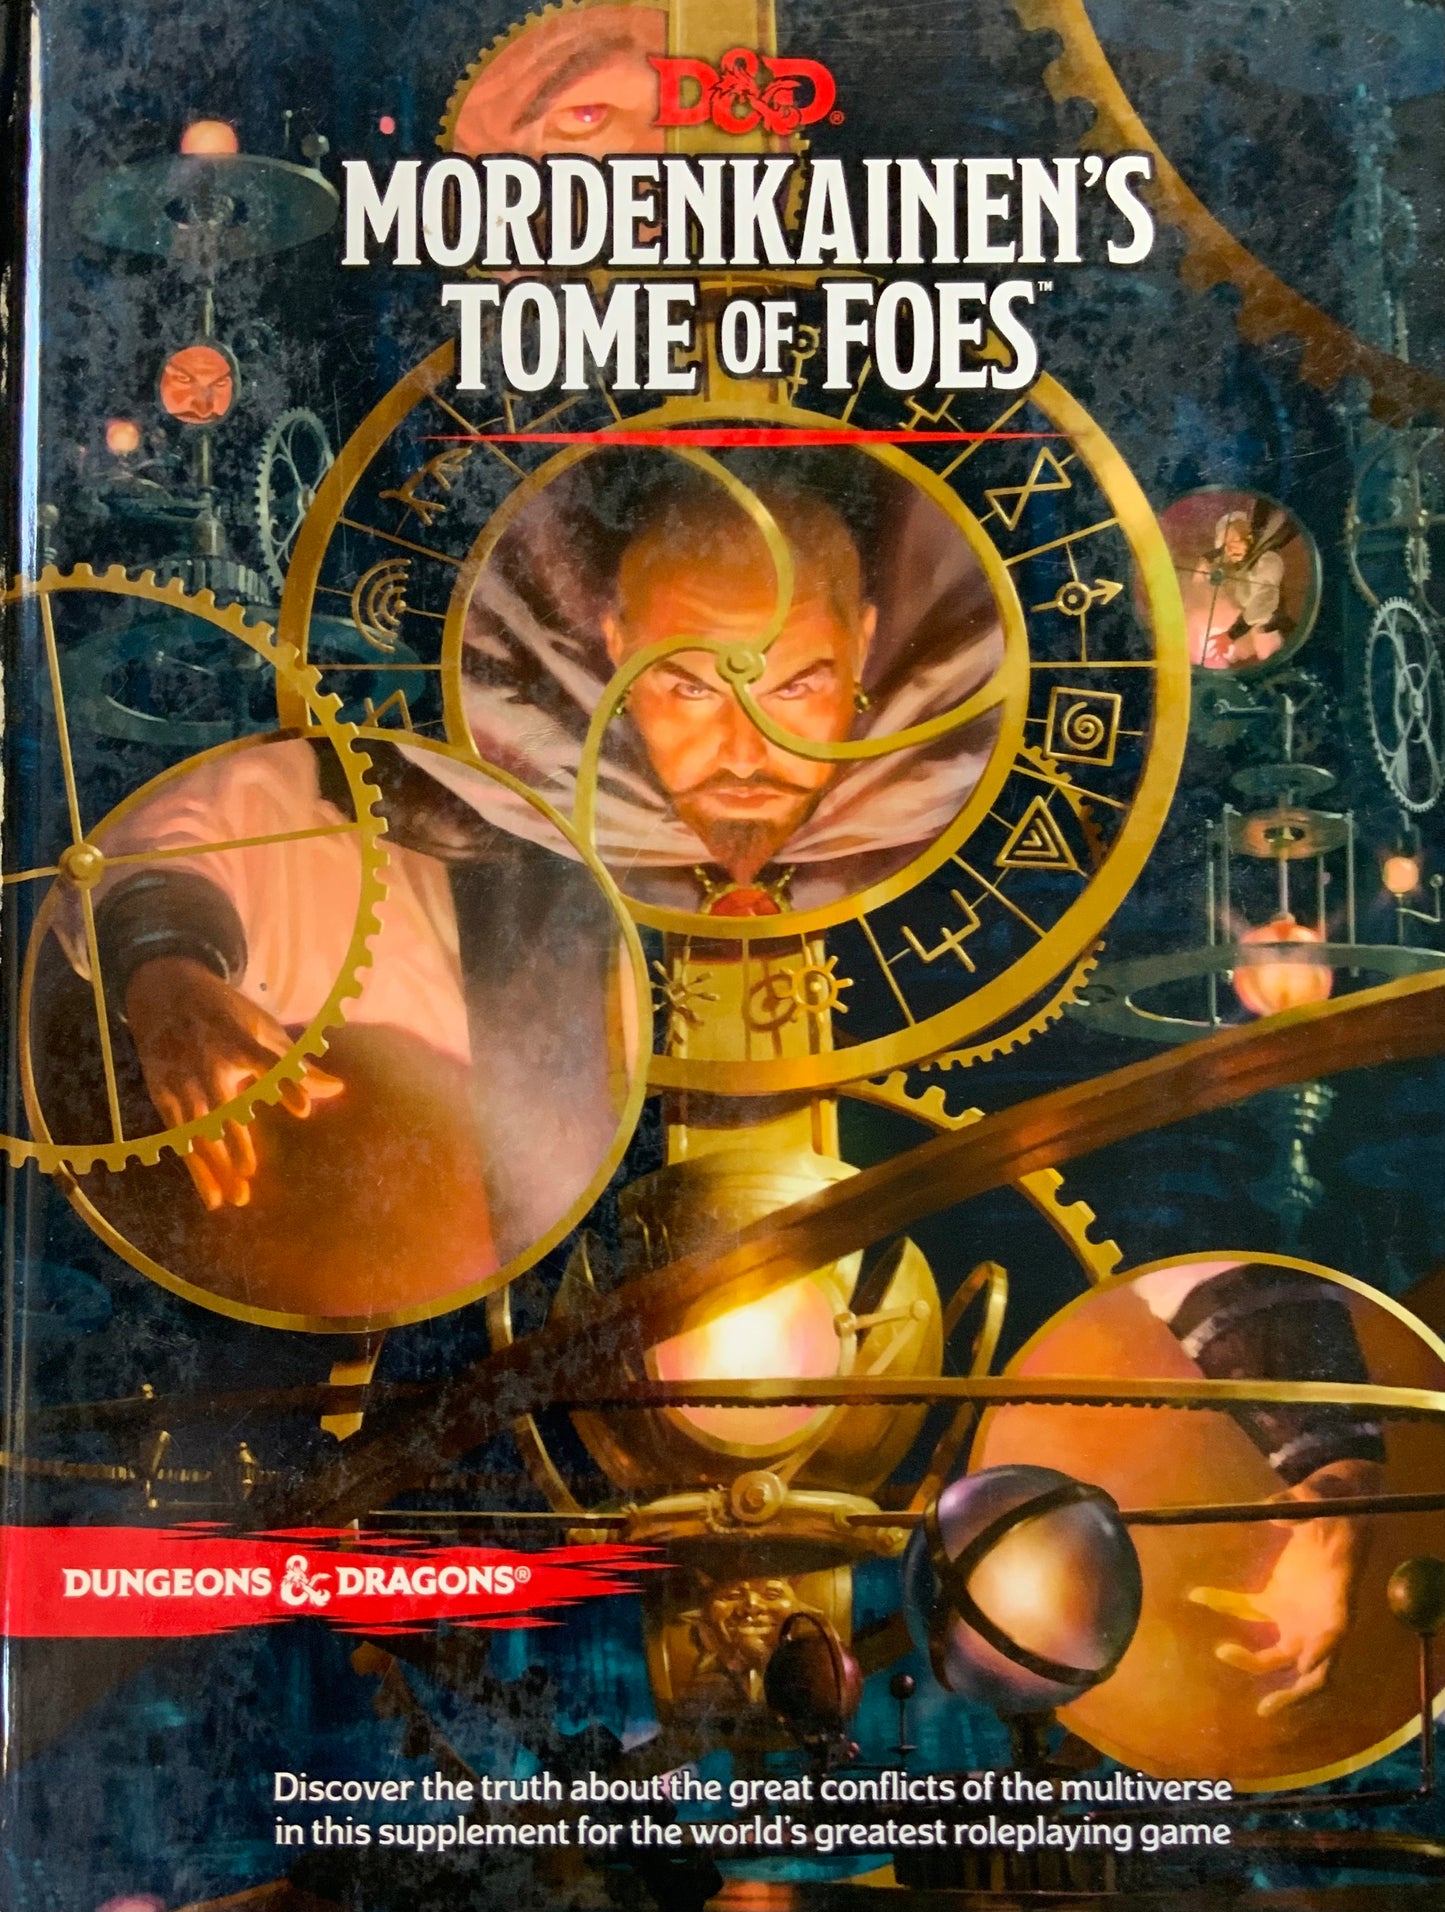 DND Mordenkainen’s Tome of Foes